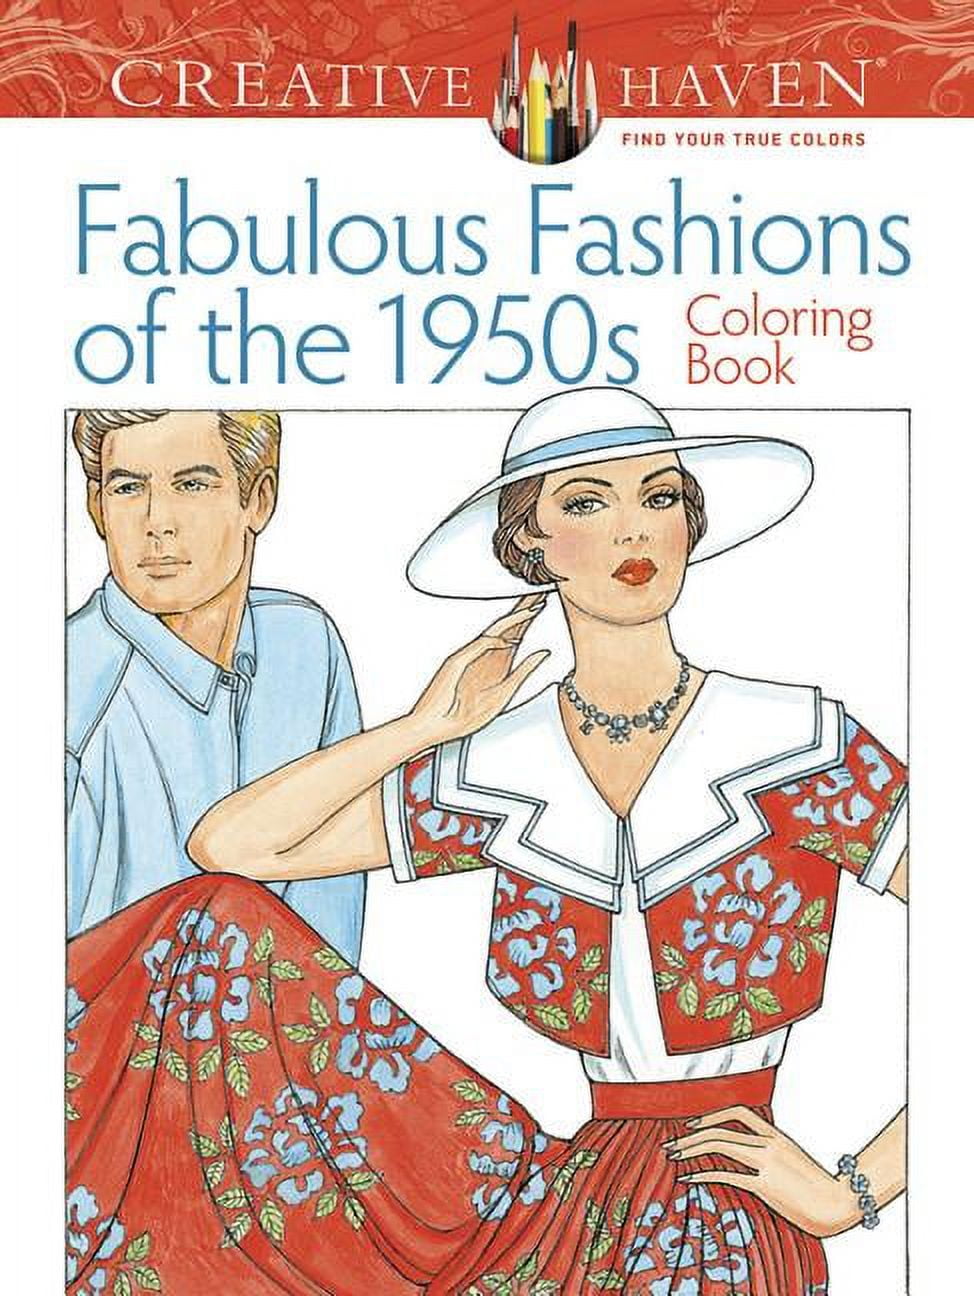 Creative Haven Fabulous Fashions of the 1950s Coloring Book [Book]